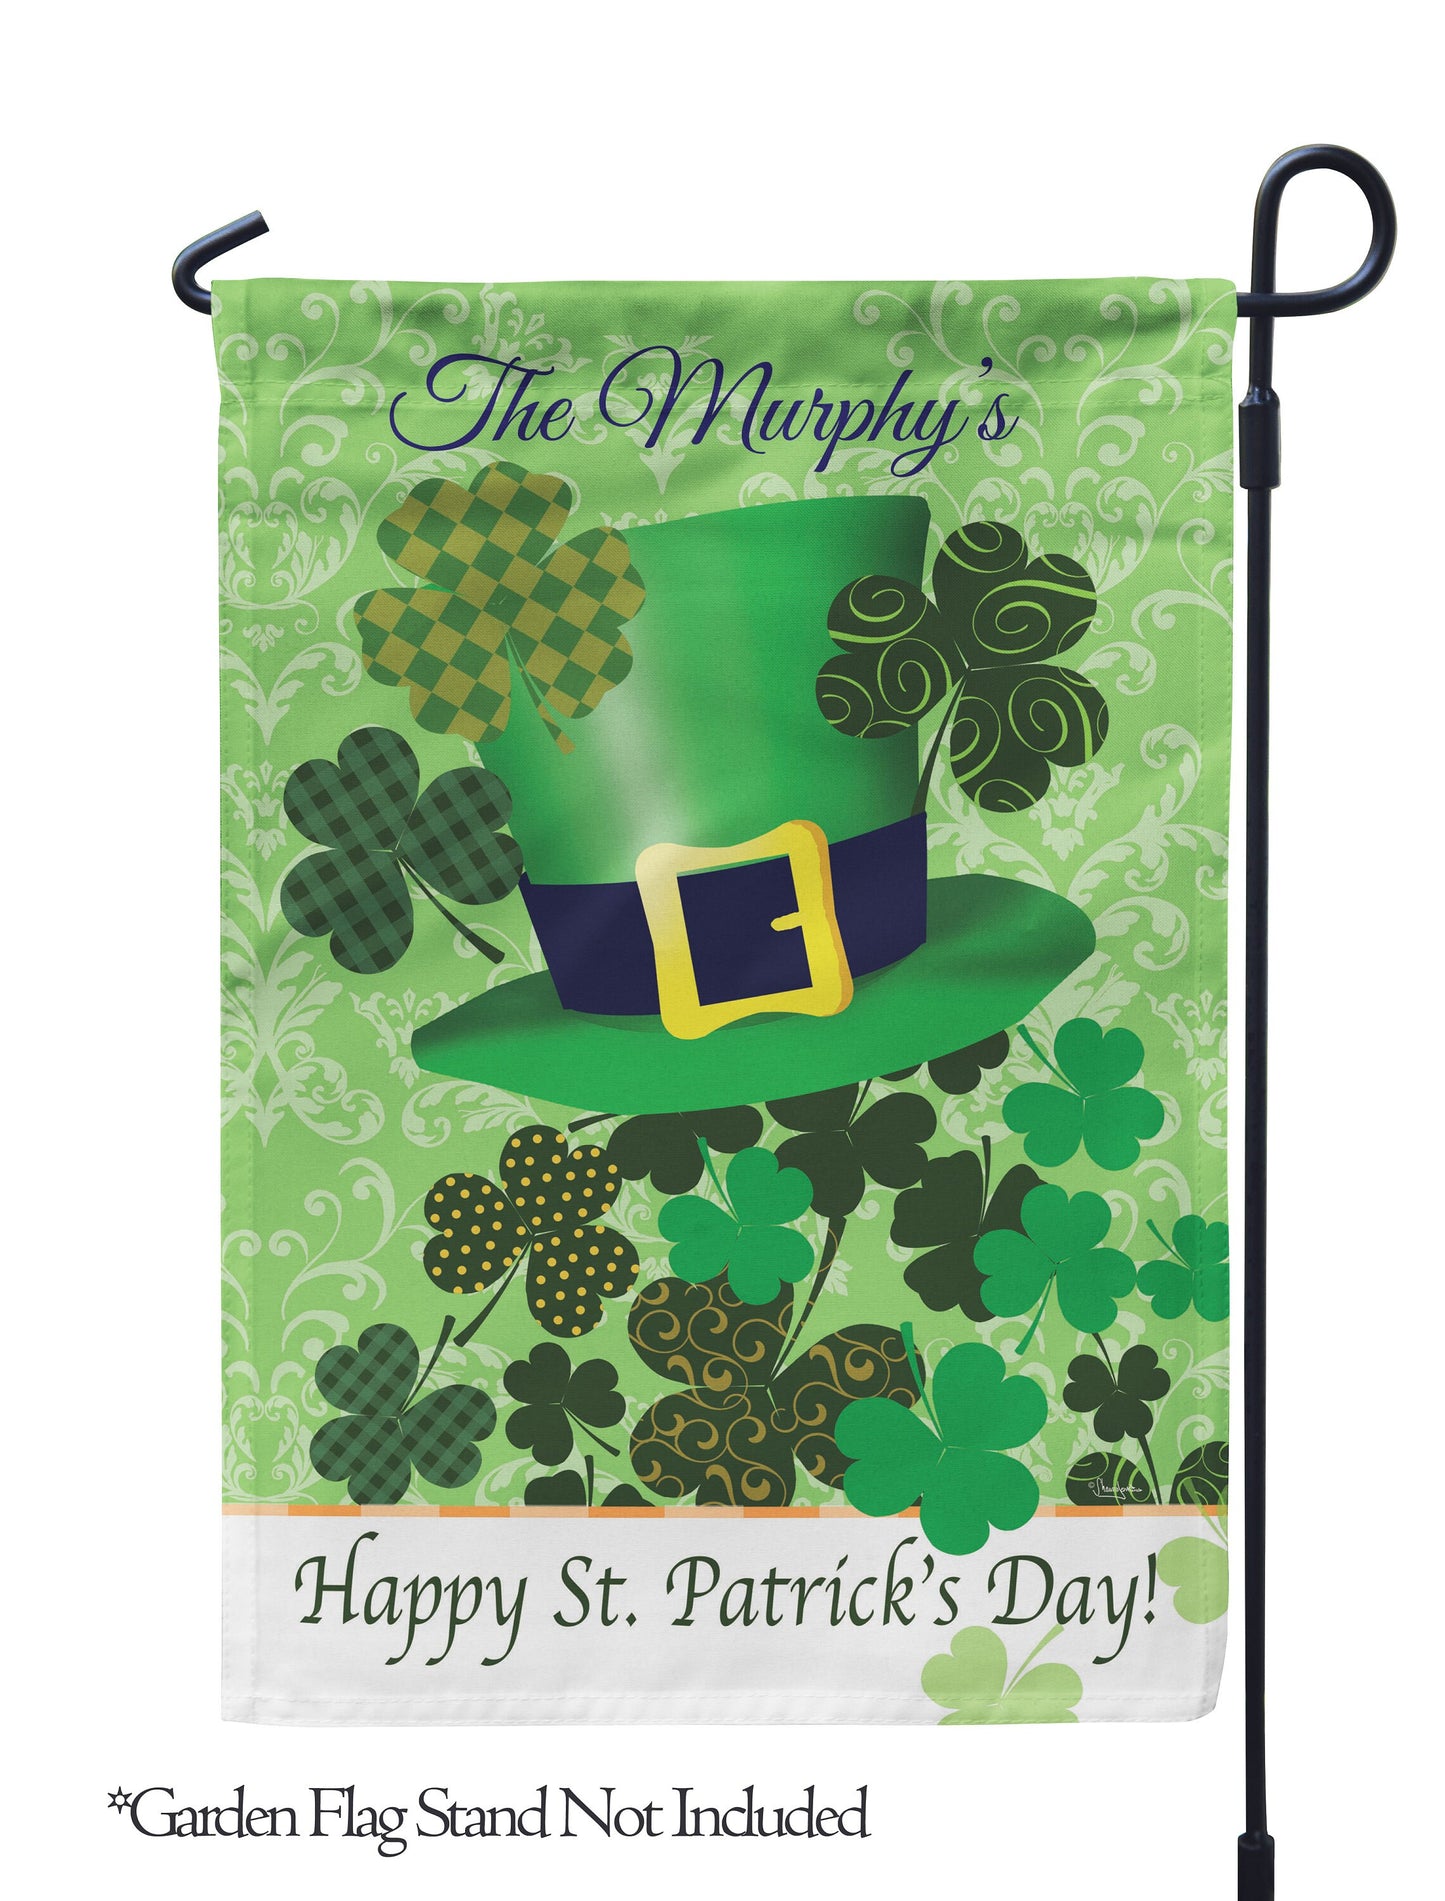 Happy St. Patrick's Day Gnome Personalized House Flag - St. Patrick's Day Garden Flag - St. Patrick's Day Decorative Flags